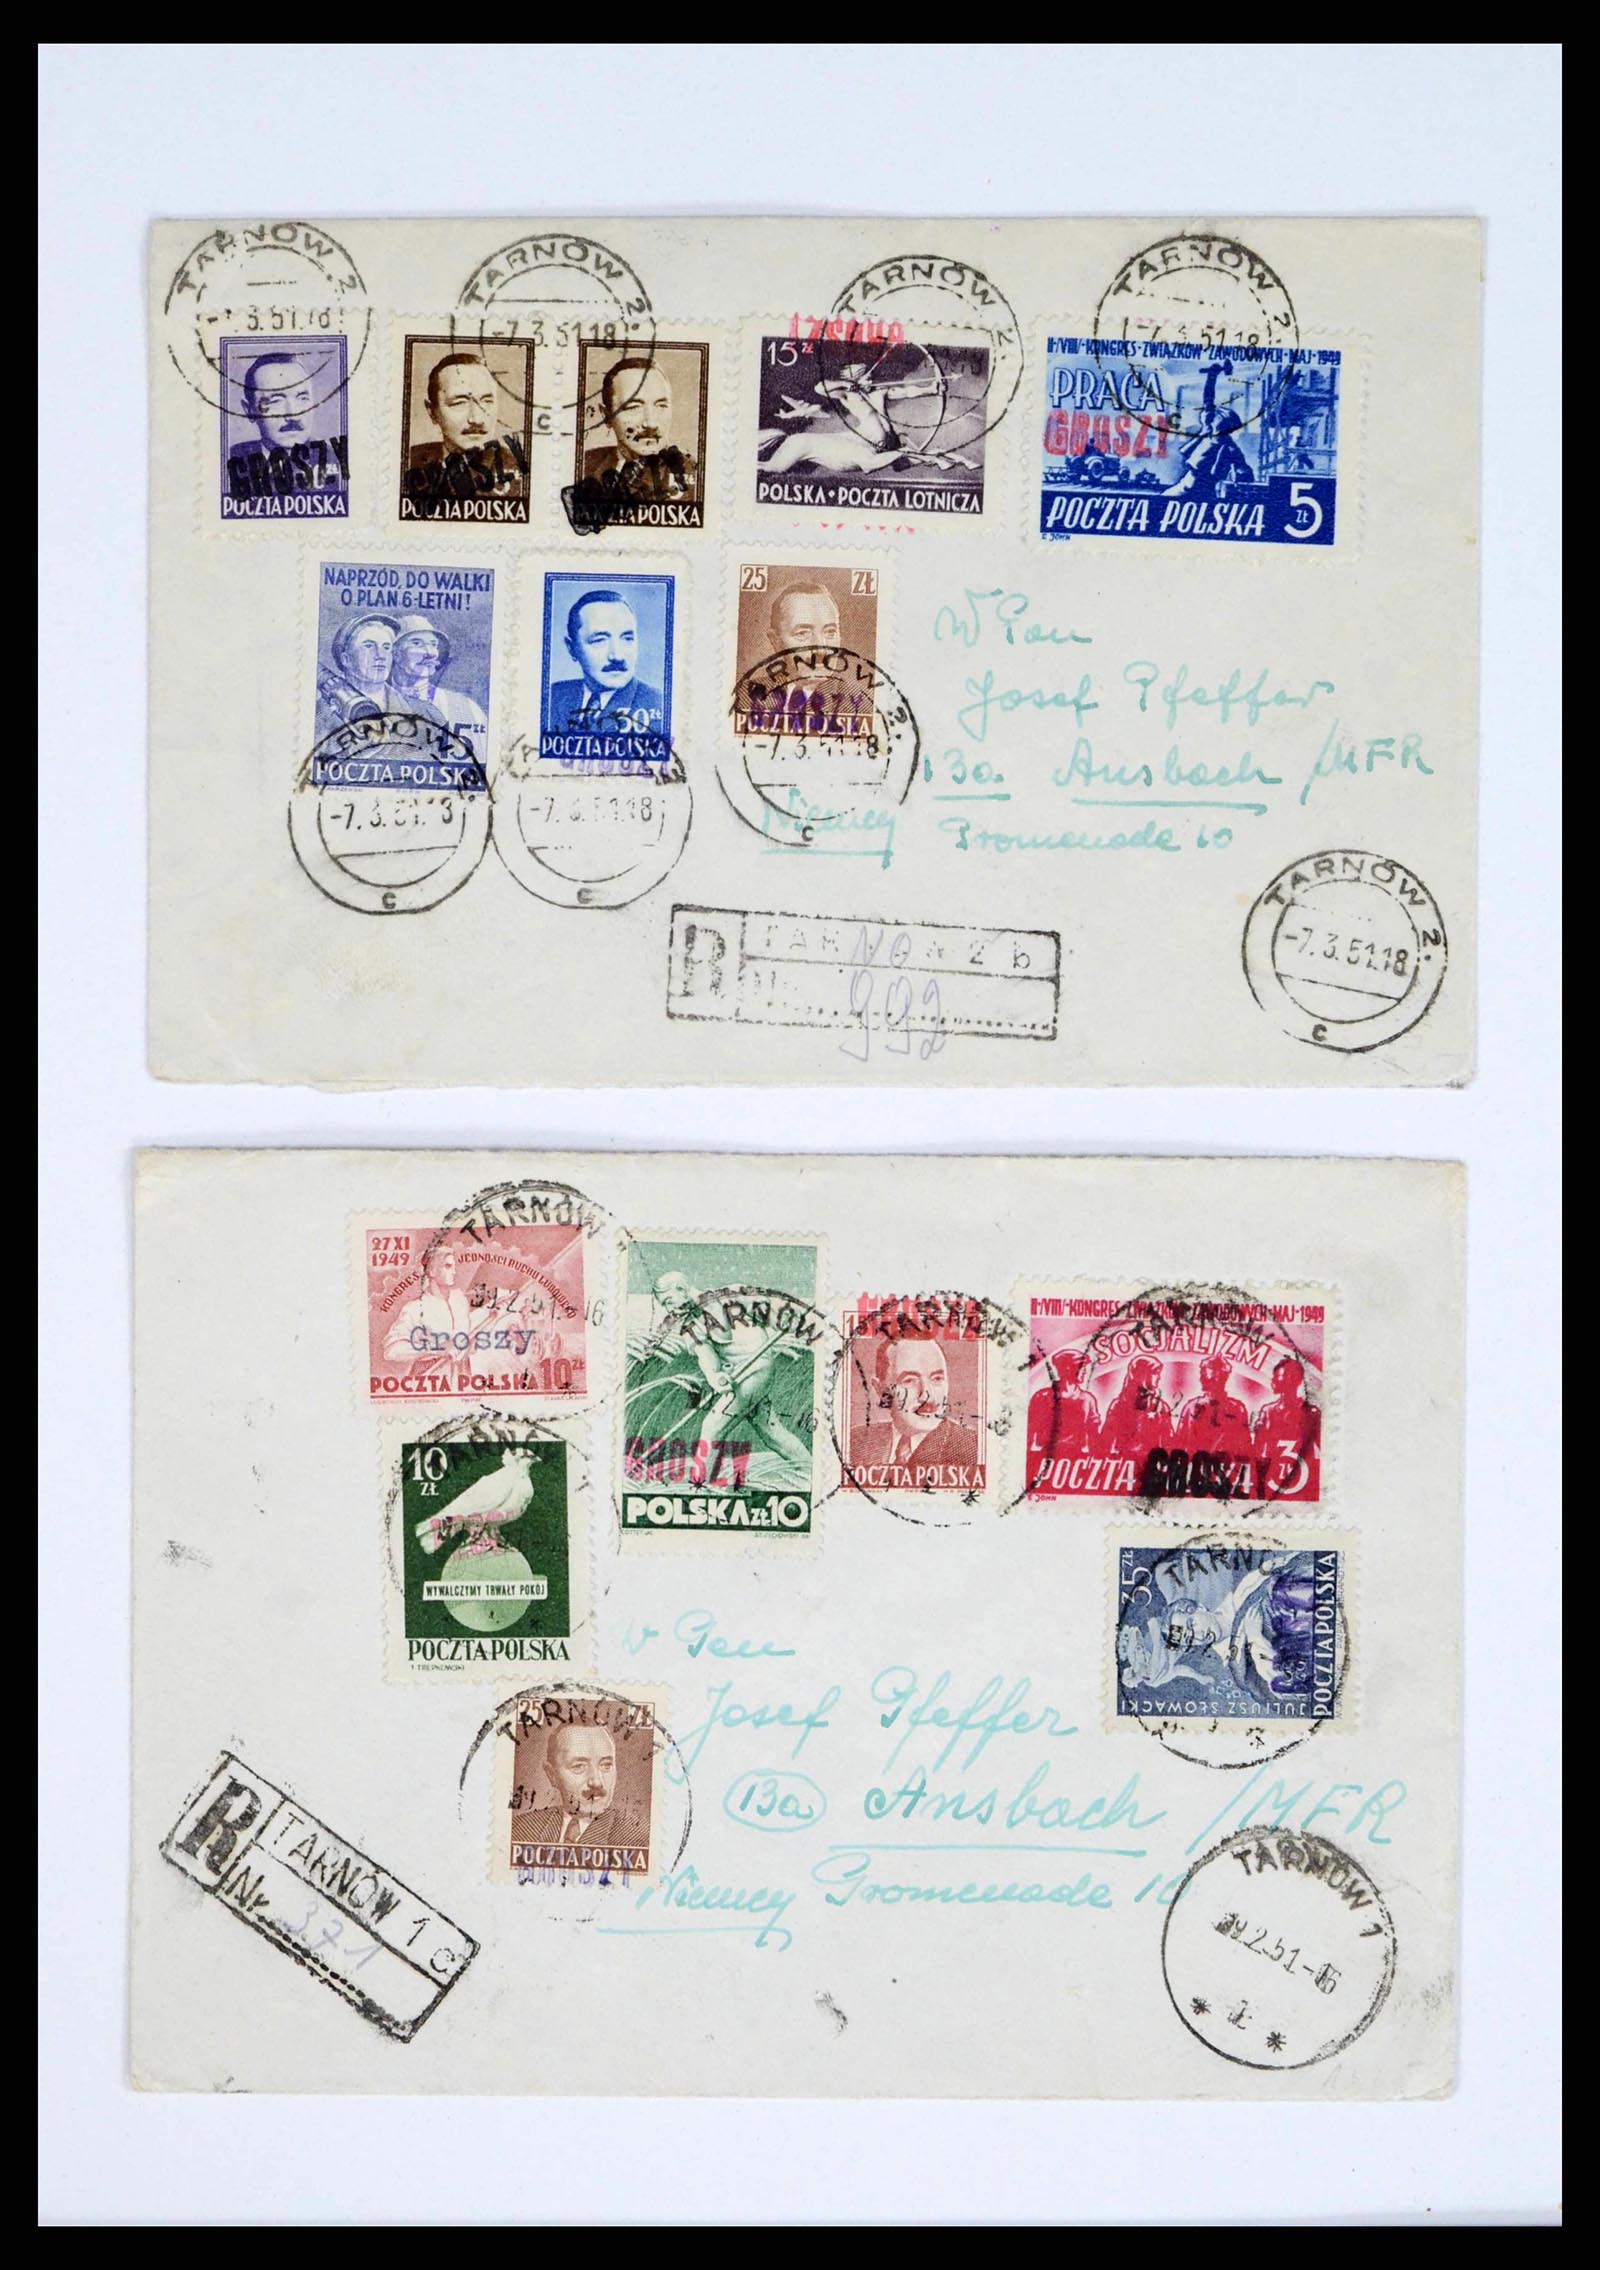 38201 0012 - Stamp collection 38201 Groszy overprints on cover 1950-1951.